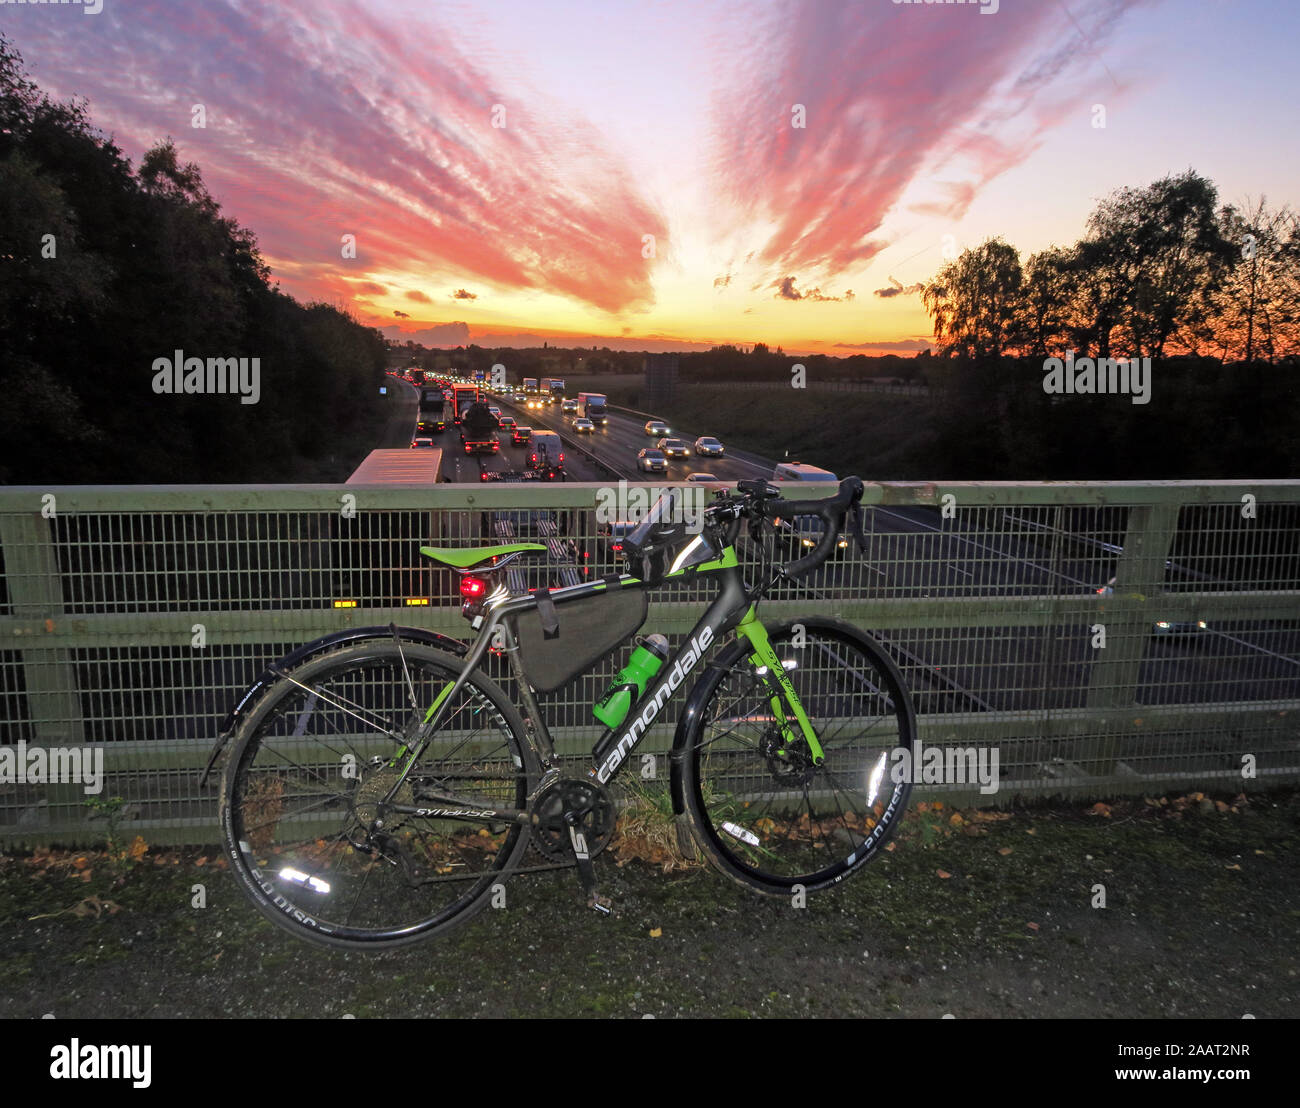 Cycle parked overlooking a busy road, with sunset, Warrington, Cheshire, UK - enjoy cycling Stock Photo